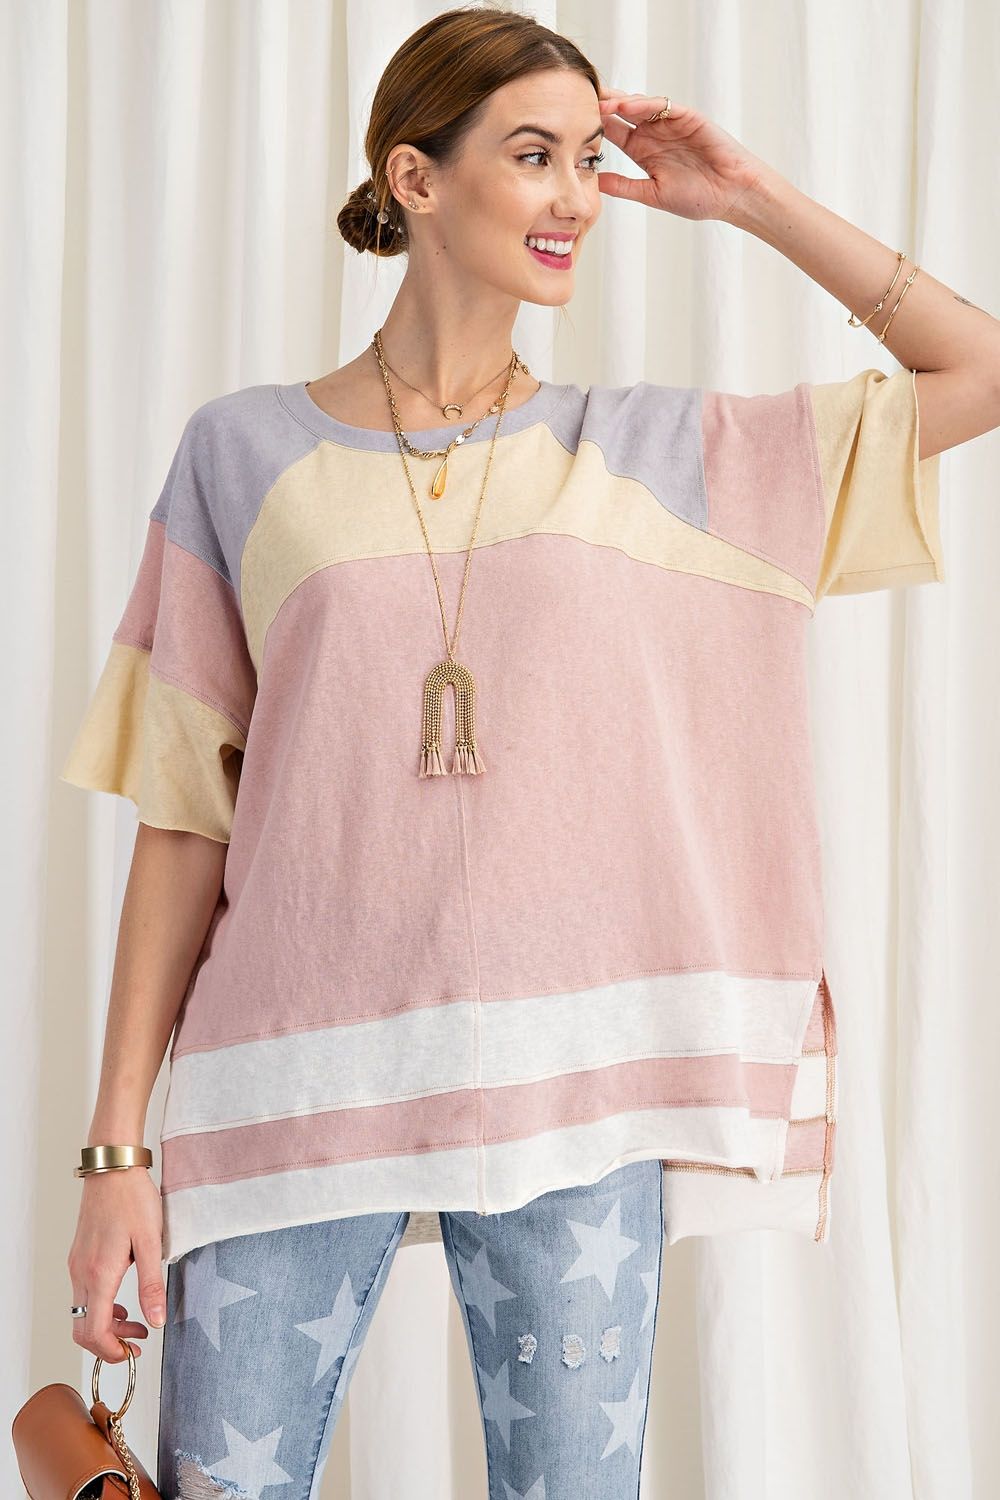 Keep it Real Color Blocked Top - Short Sleeve Cotton Jersey Loose Fit Top - available in 3 colors  Ivy and Pearl Boutique Rose S 